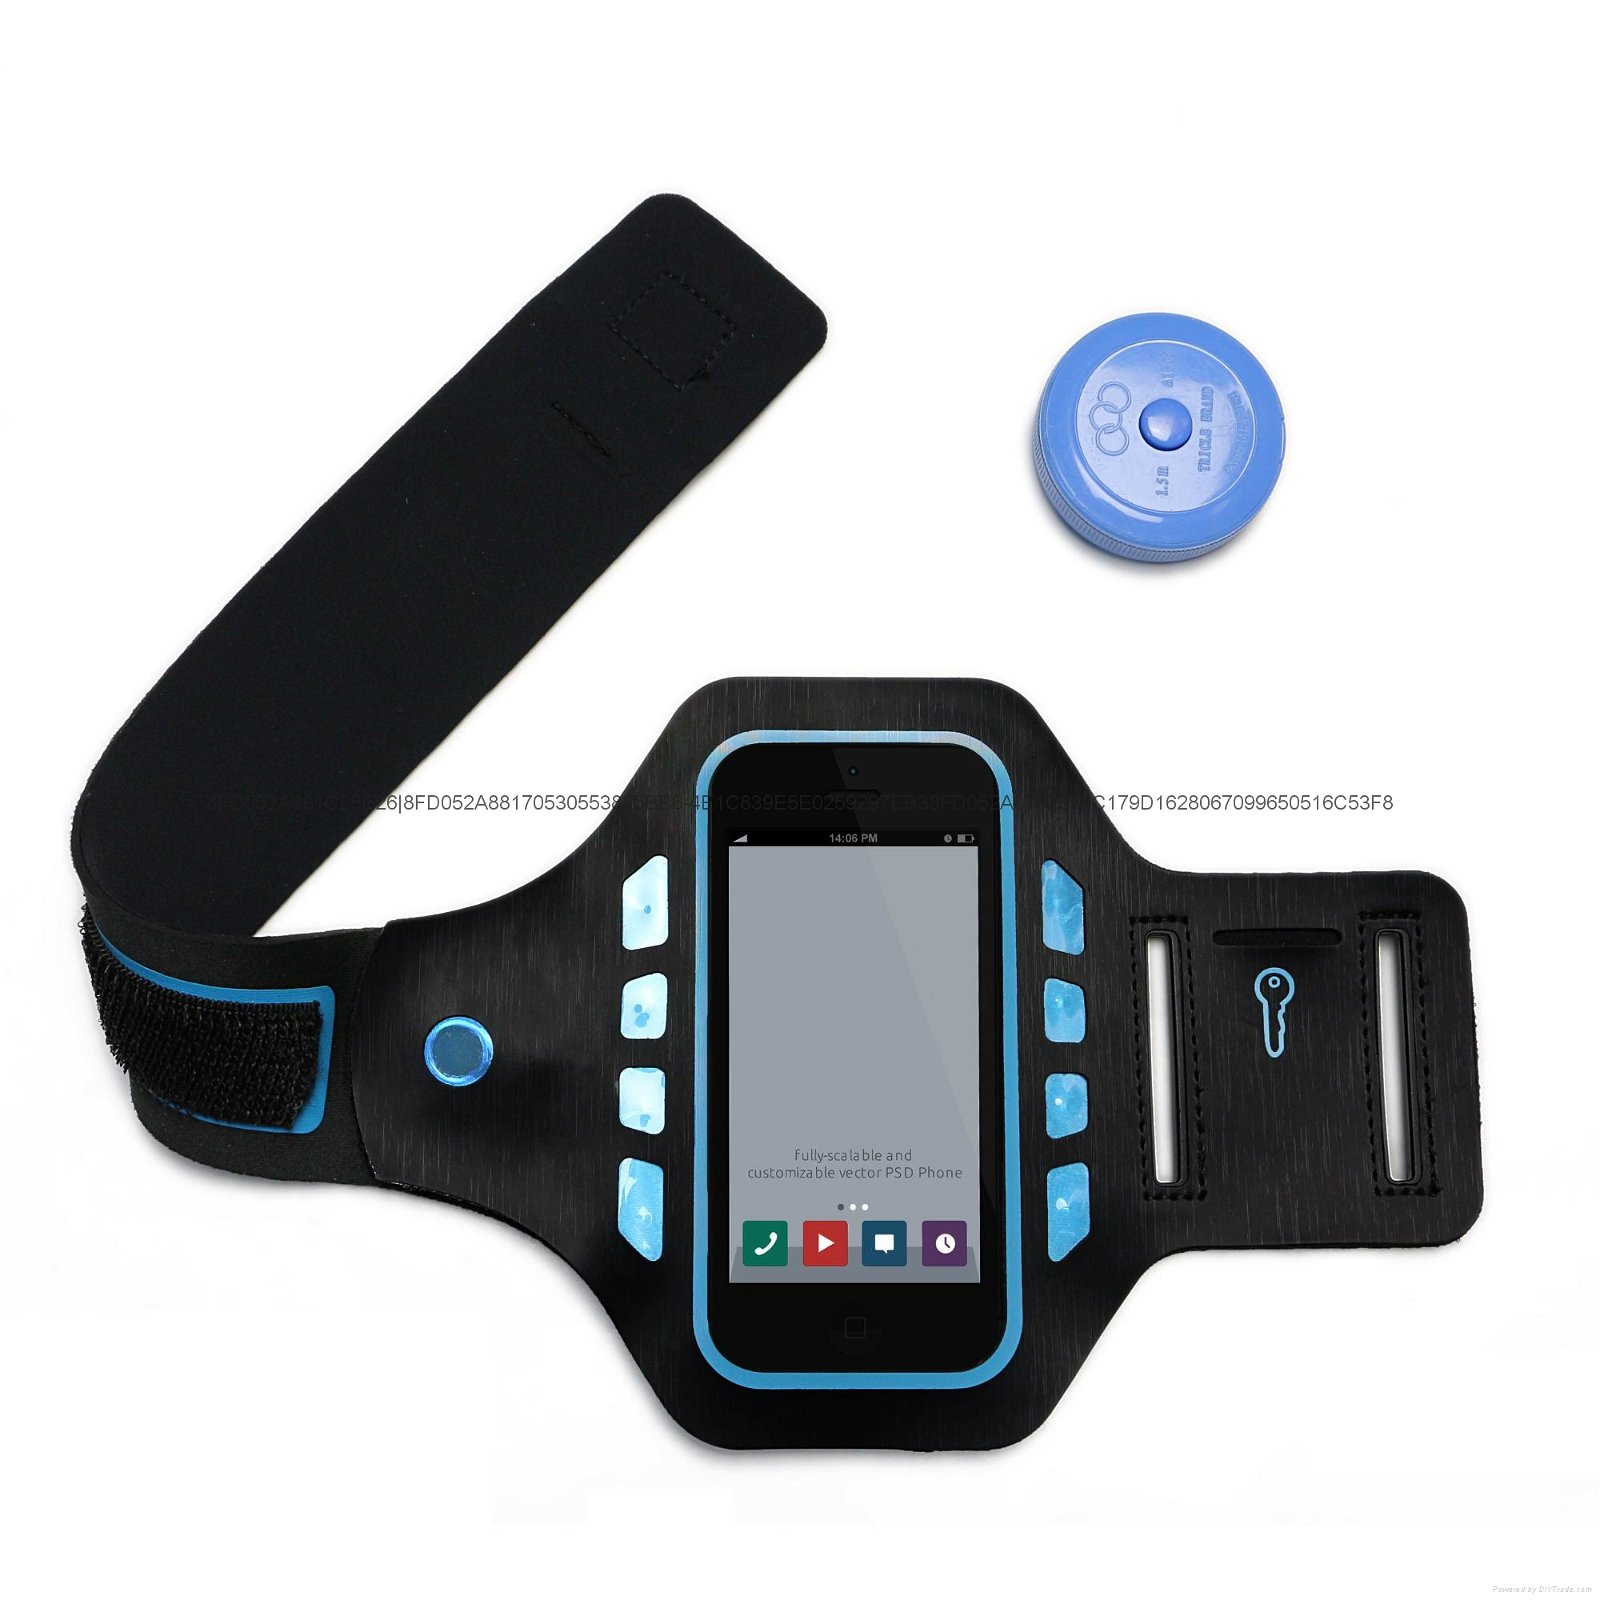 LED safety sports armband, any customized designs and sizes accepted 3